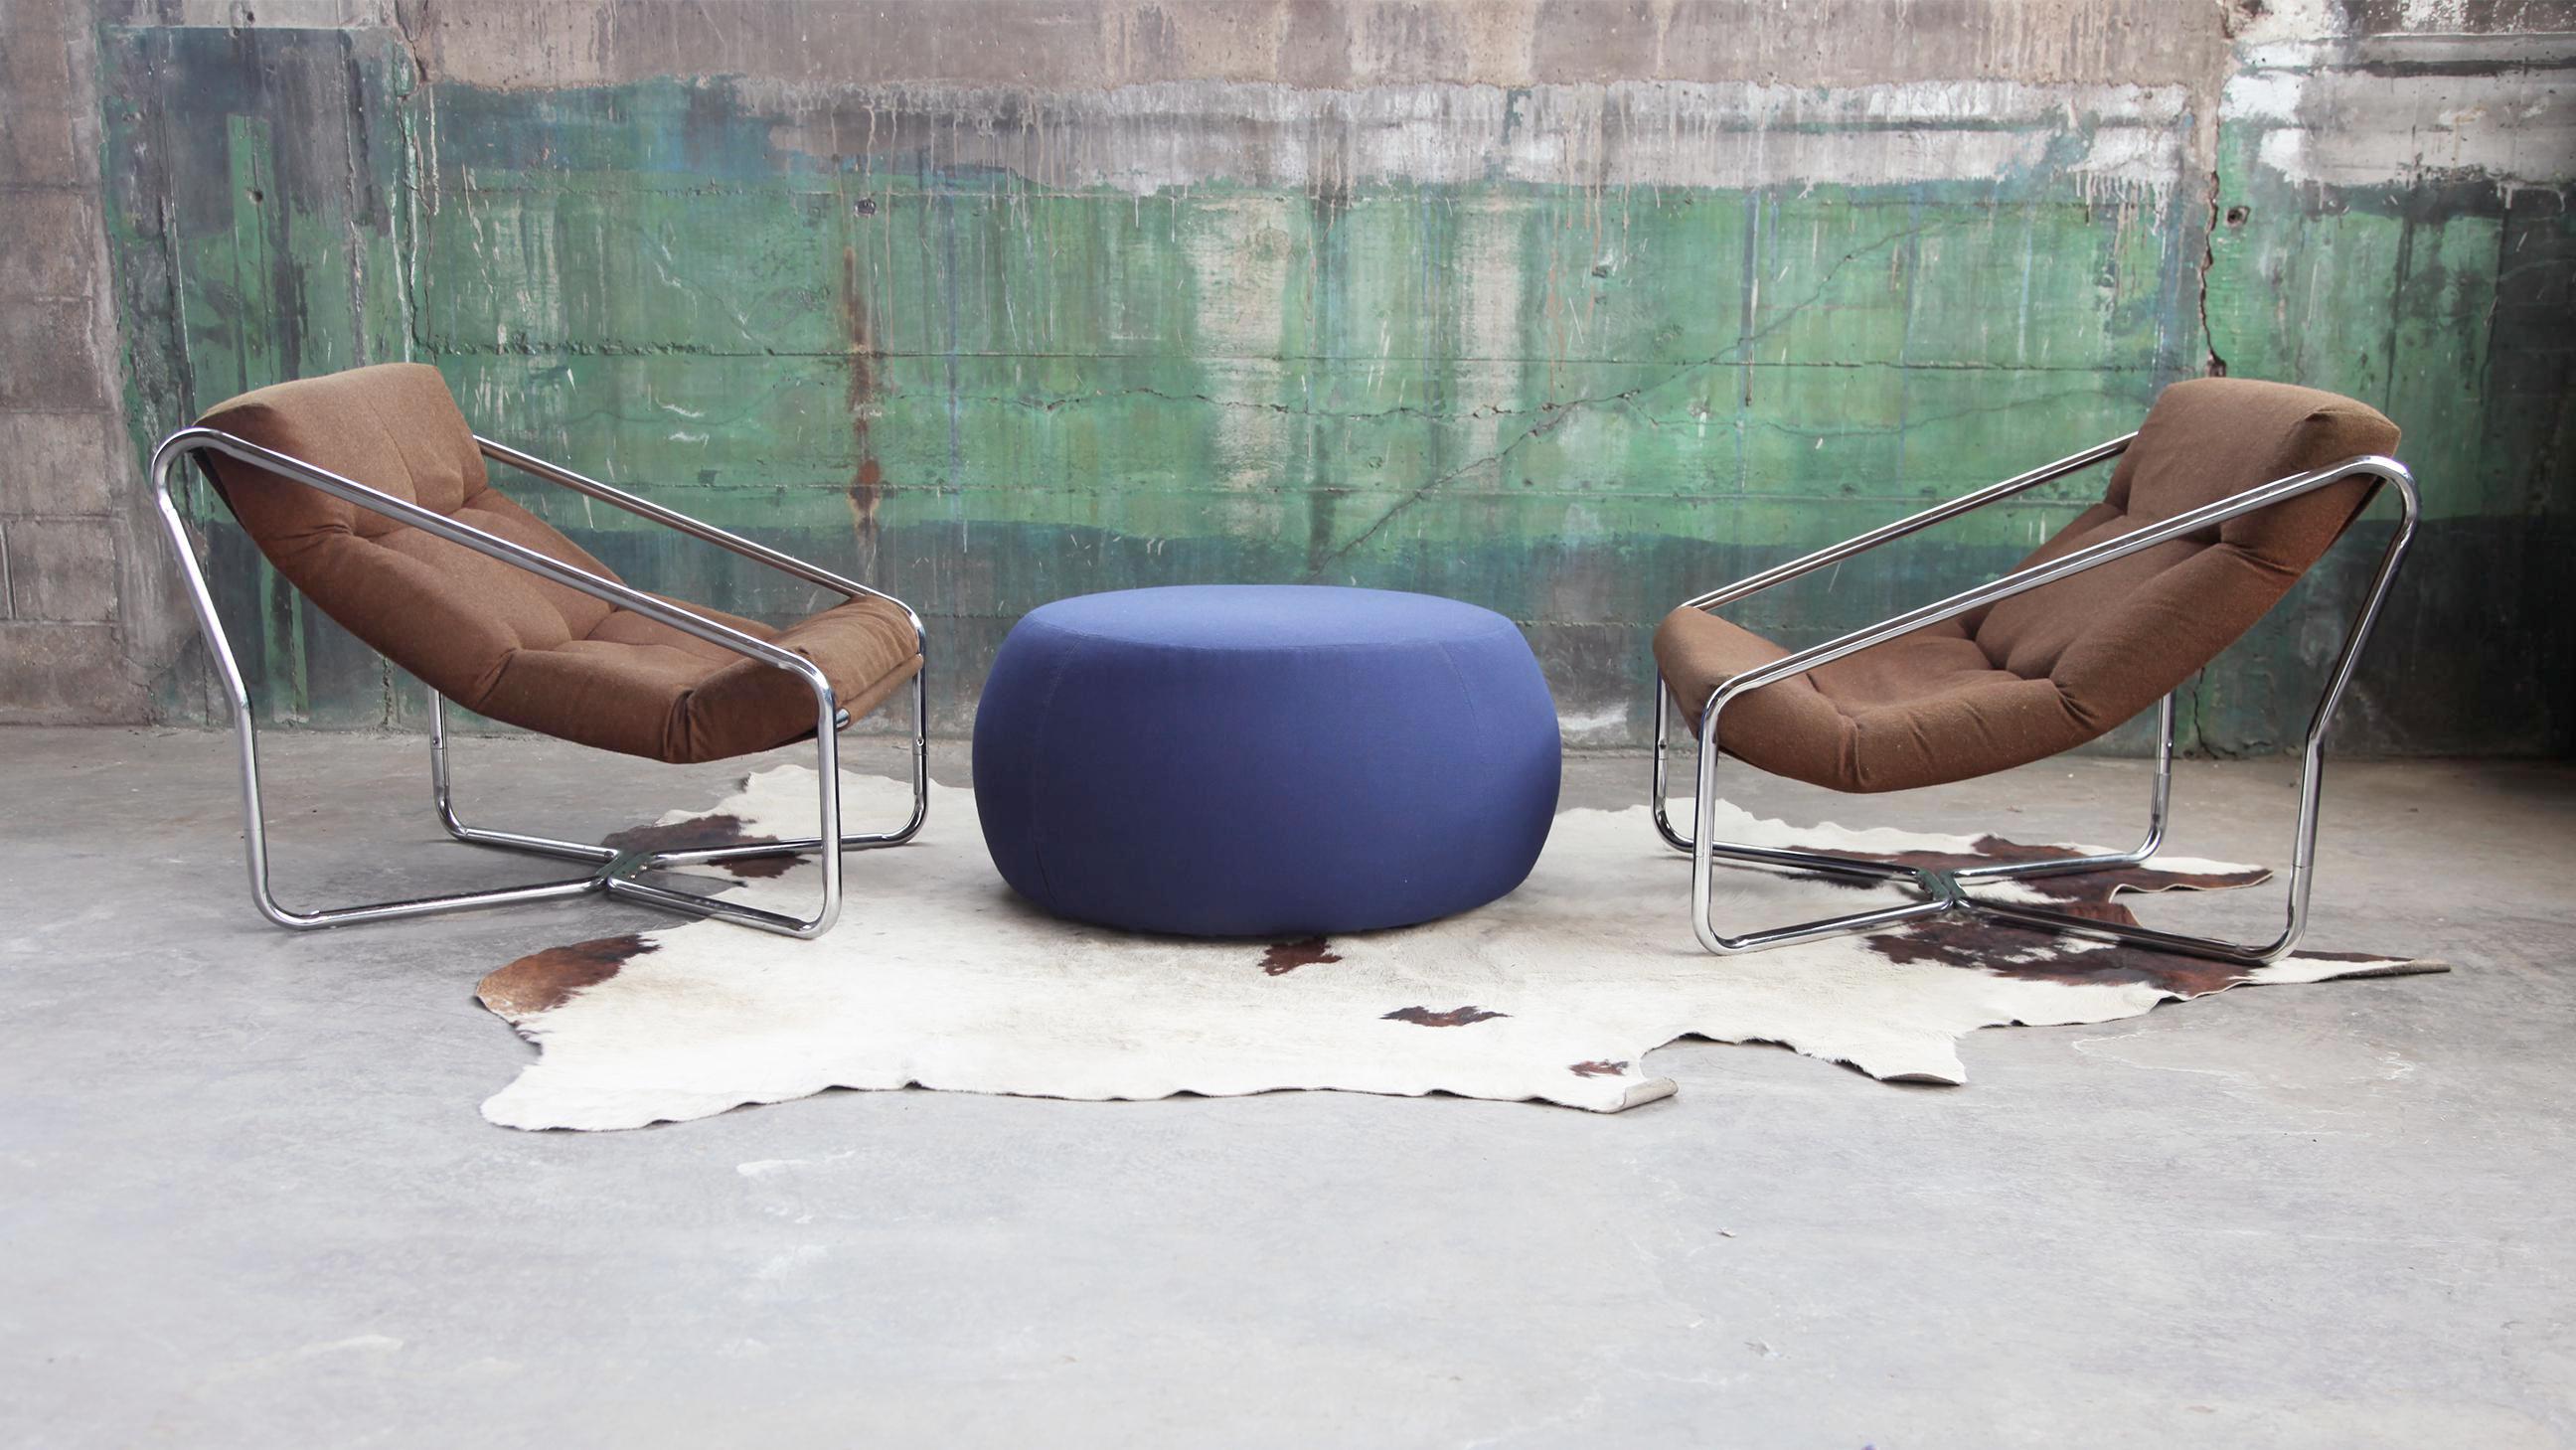 Two seat pouf. Upholstery in leather, faux leather, fabric or customer's own material. Fitted with glides.

Gorgeous Mint Condition EUC Ottomans by Arper. These ottomans fit beautifully with a sectional or just for extra seating in innumerable ways.